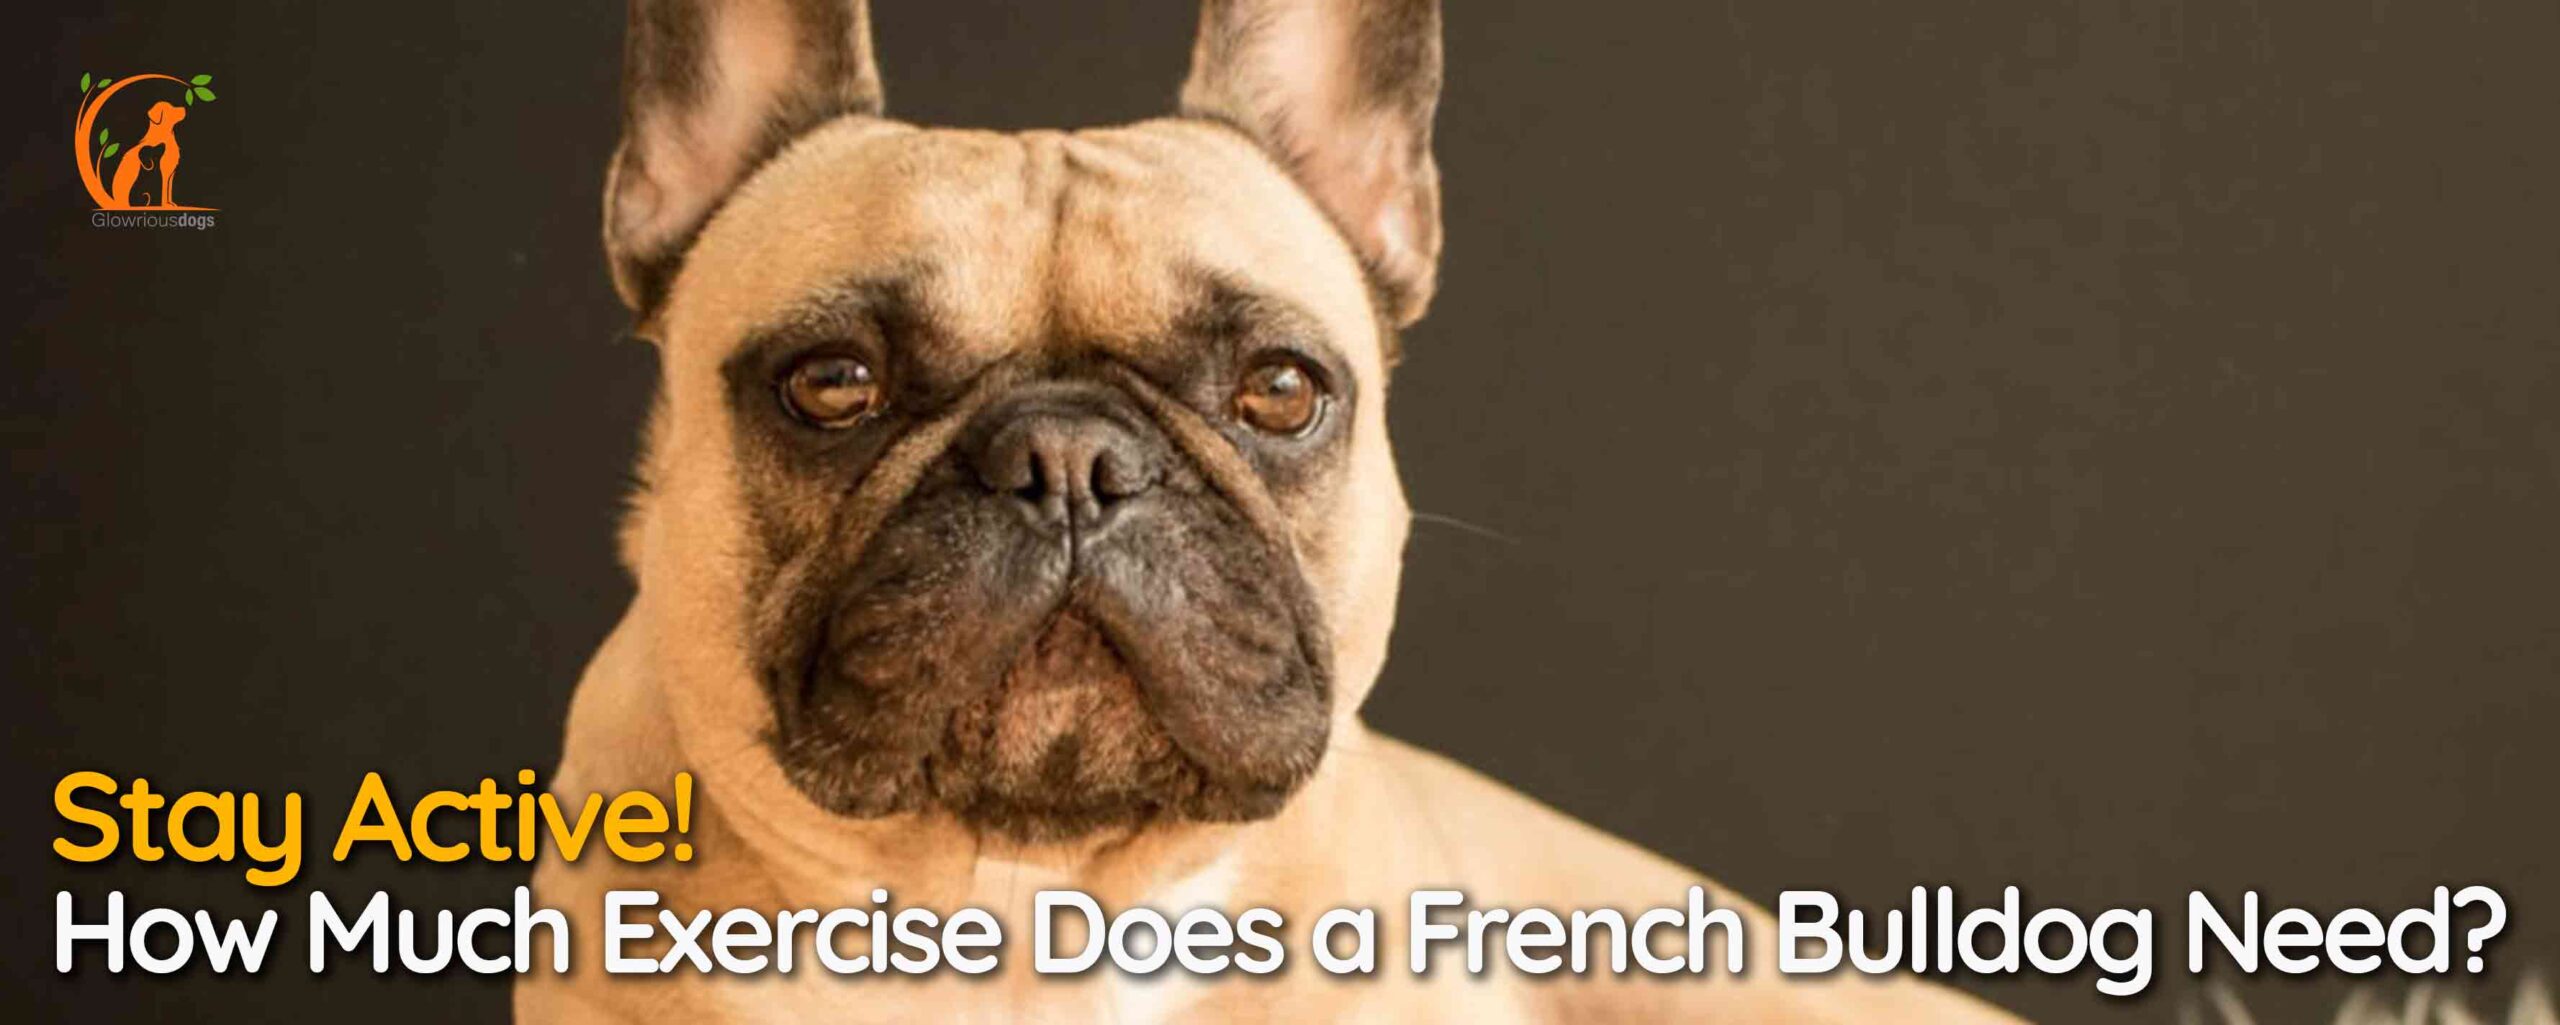 Stay Active! How Much Exercise Does a French Bulldog Need?